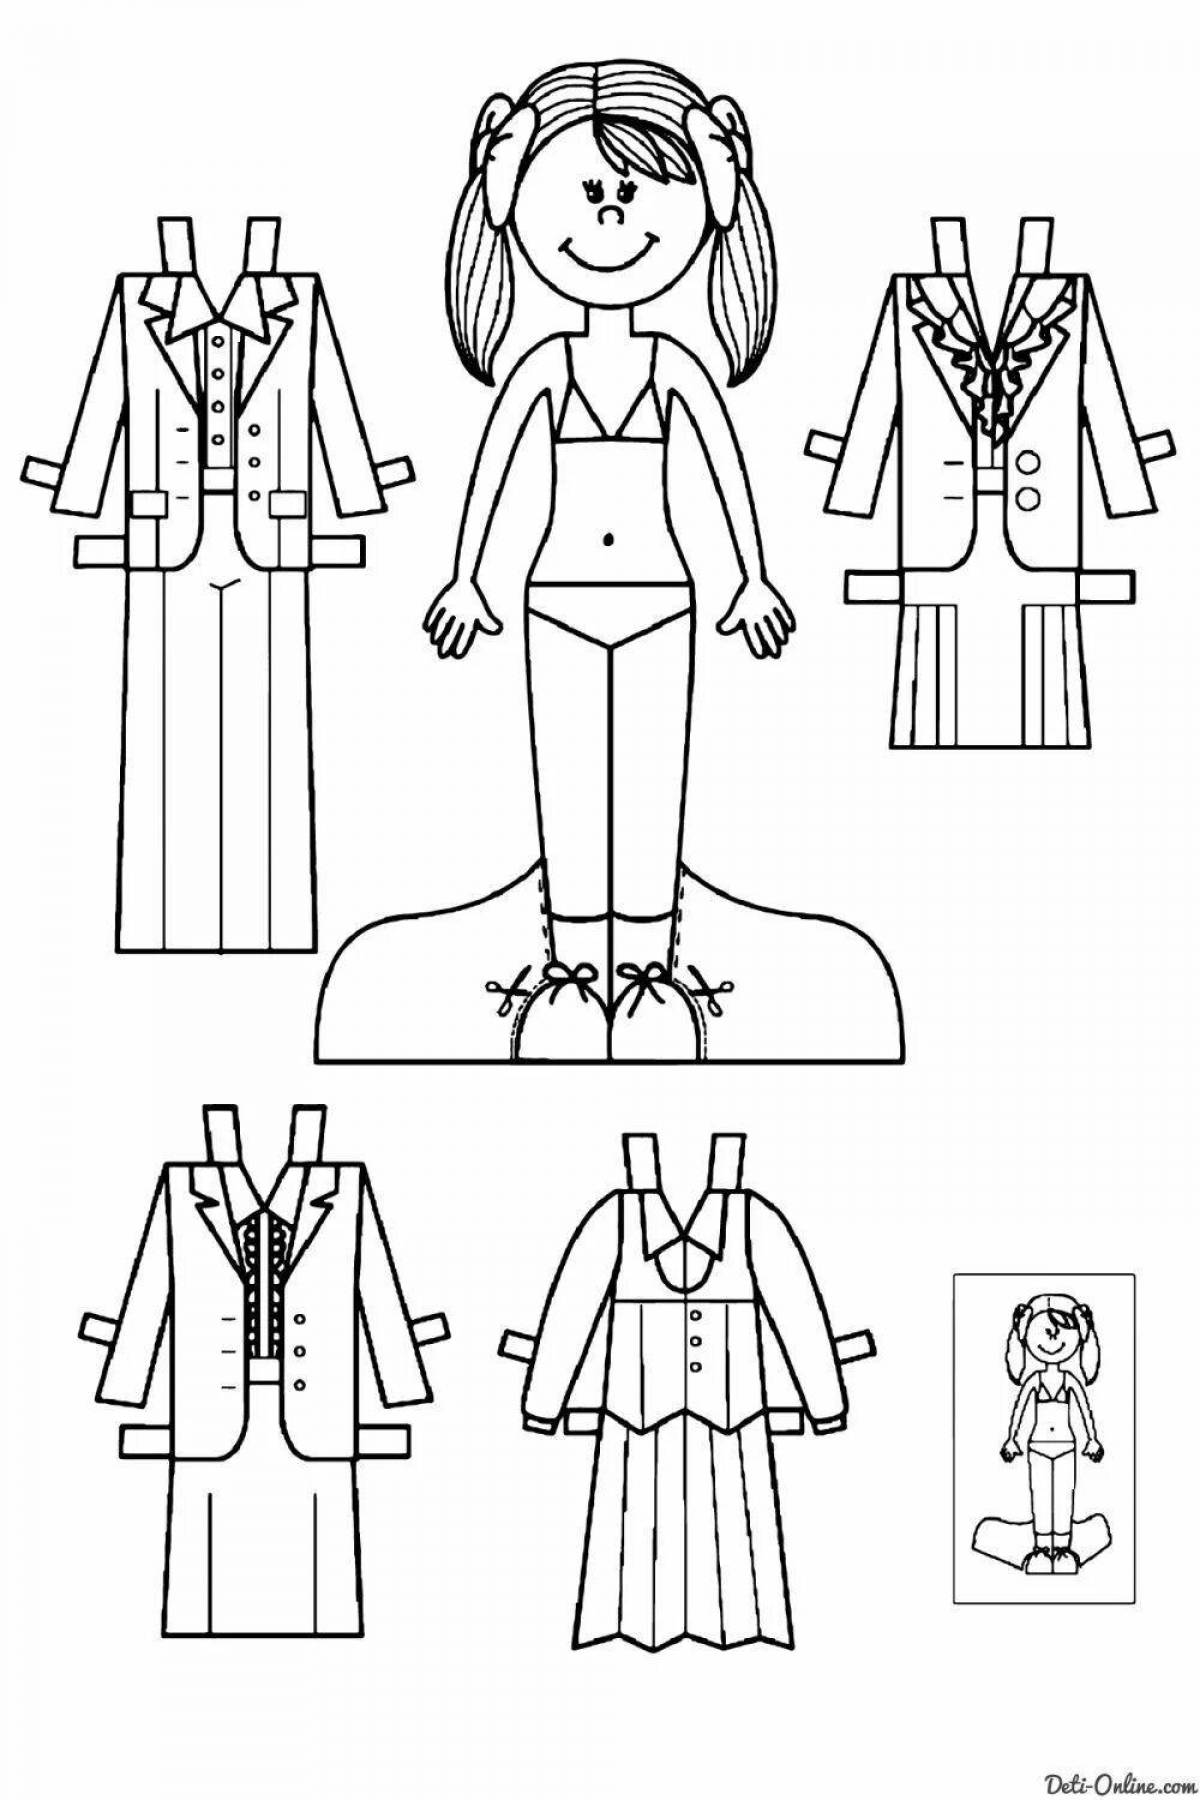 Joyful paper dolls with clothes